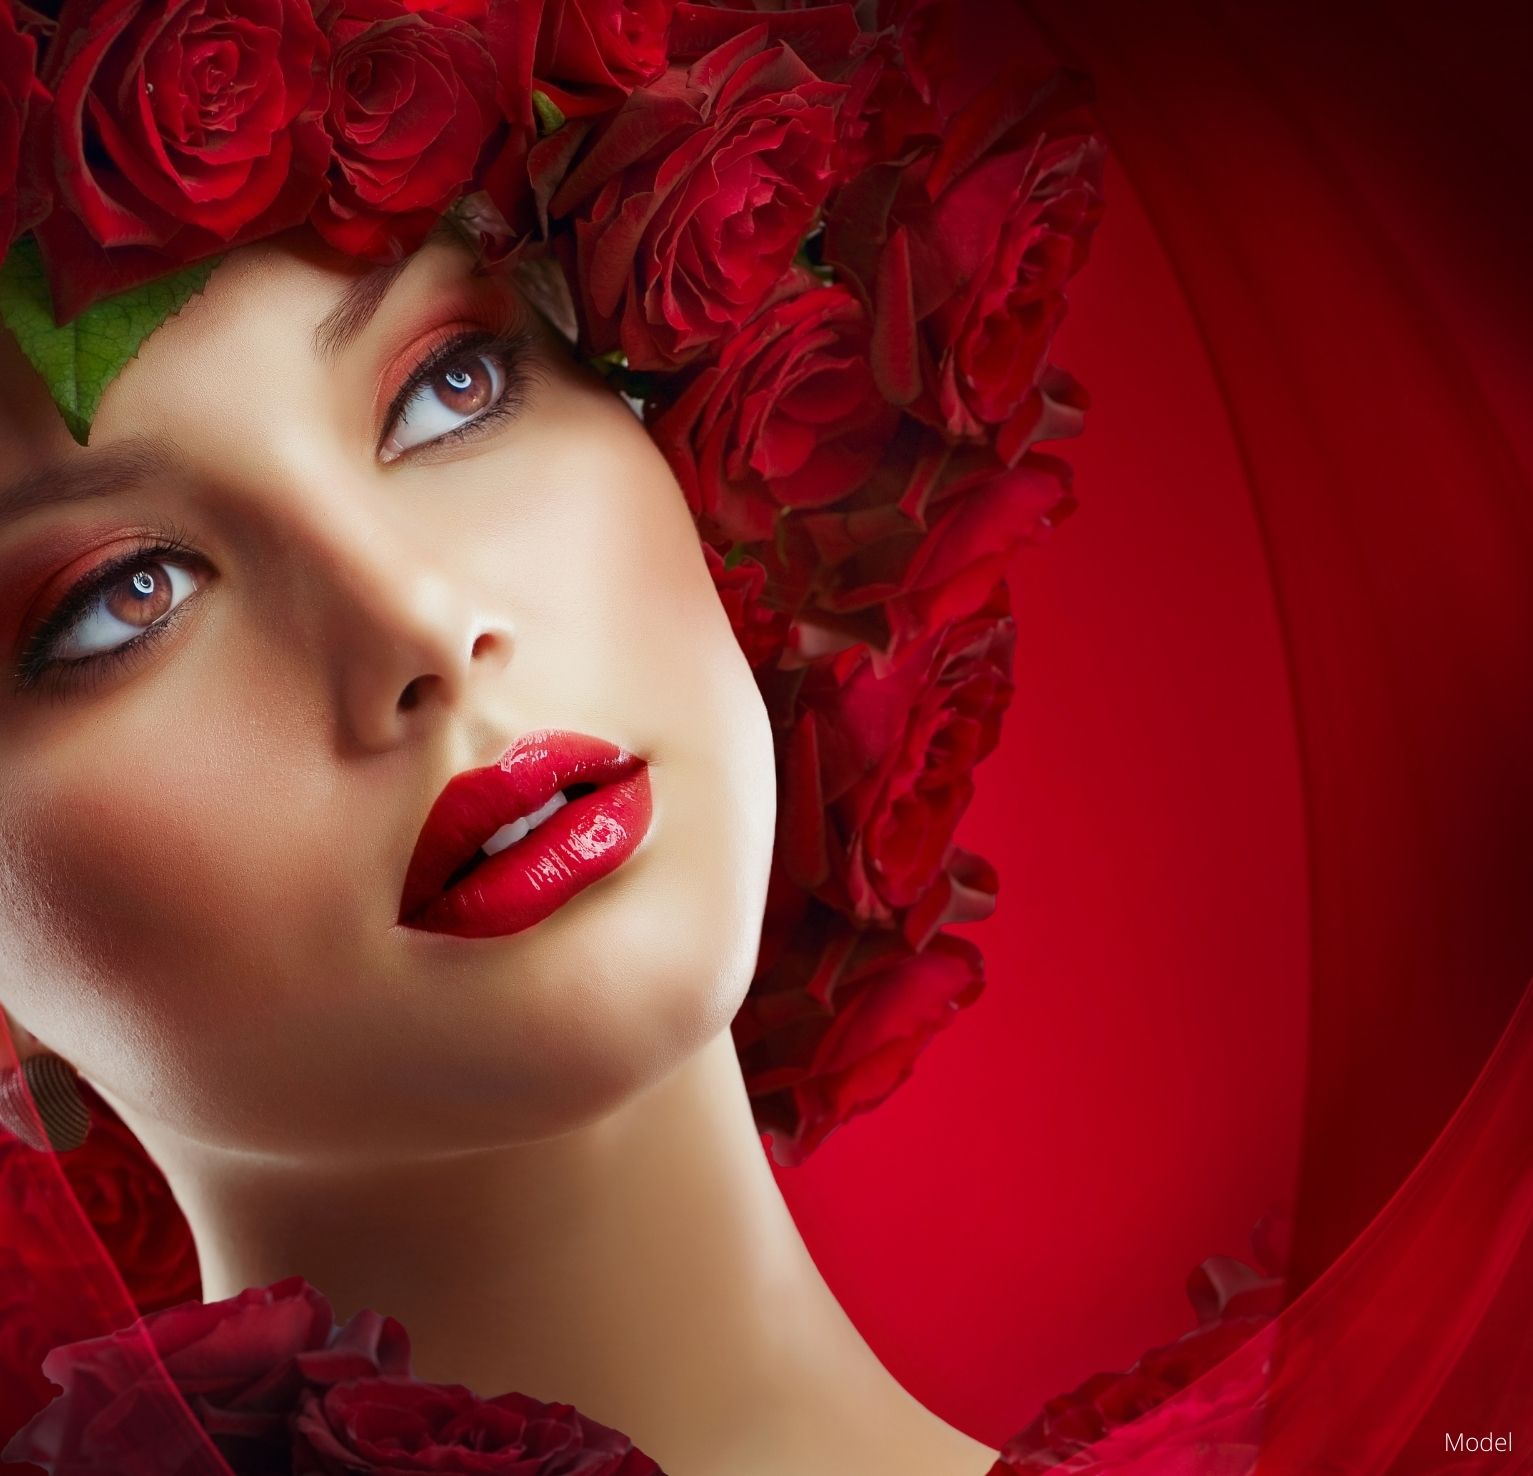 Woman in red lipstick and red eye makeup with a wreath of red roses on her head in front of a red background